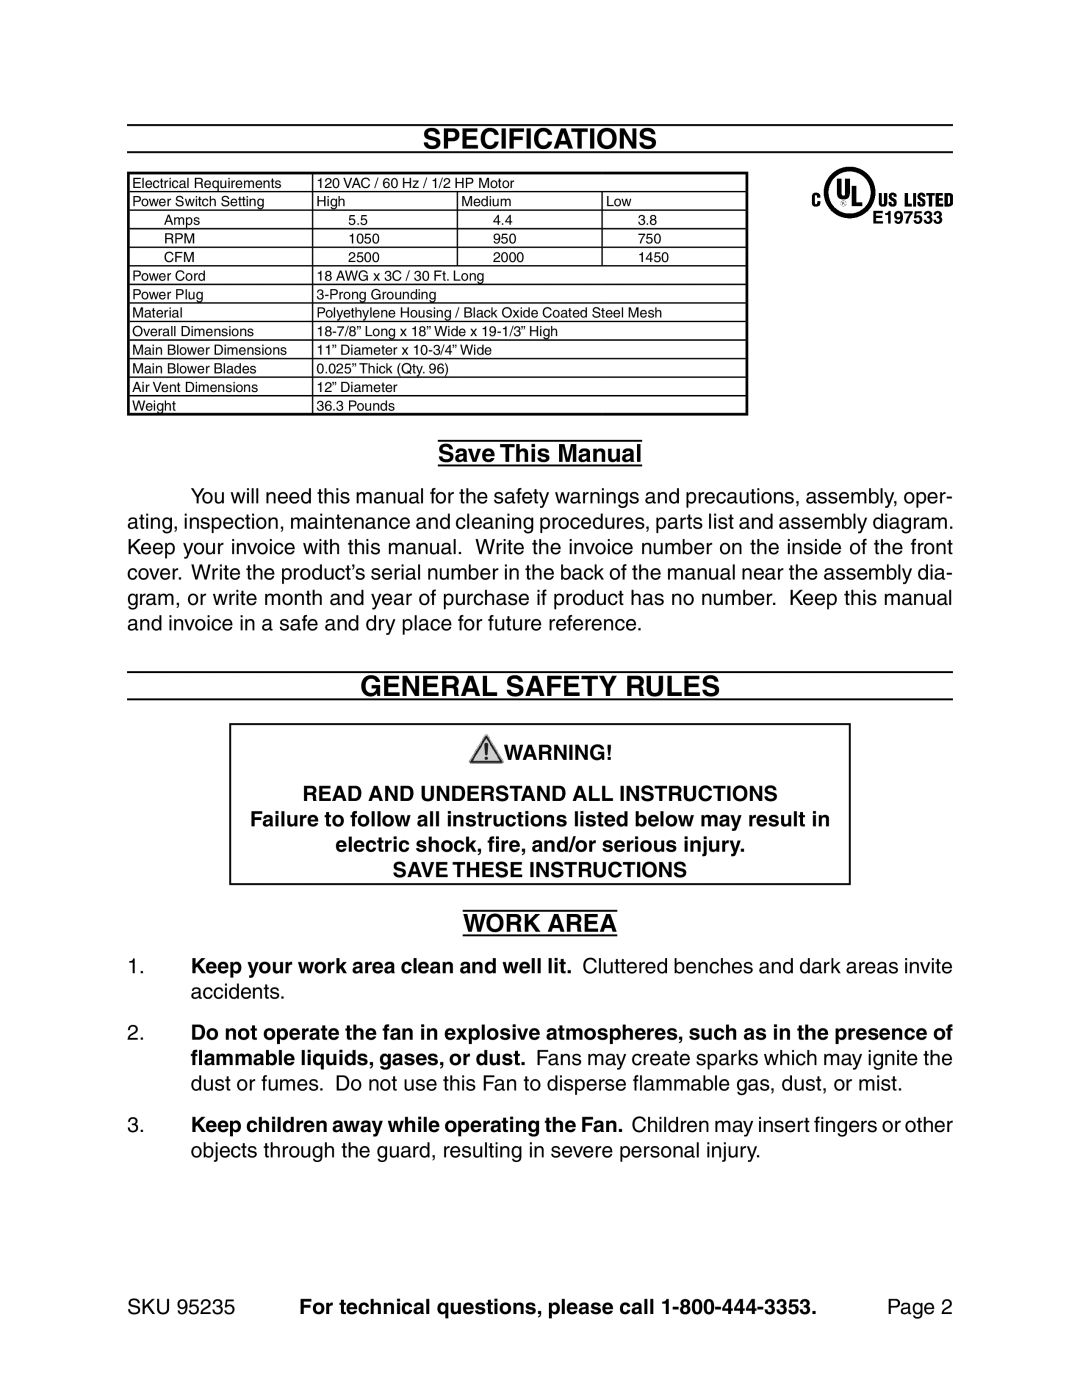 Chicago Electric 95235 manual Specifications, General Safety Rules, Save This Manual, Work Area 